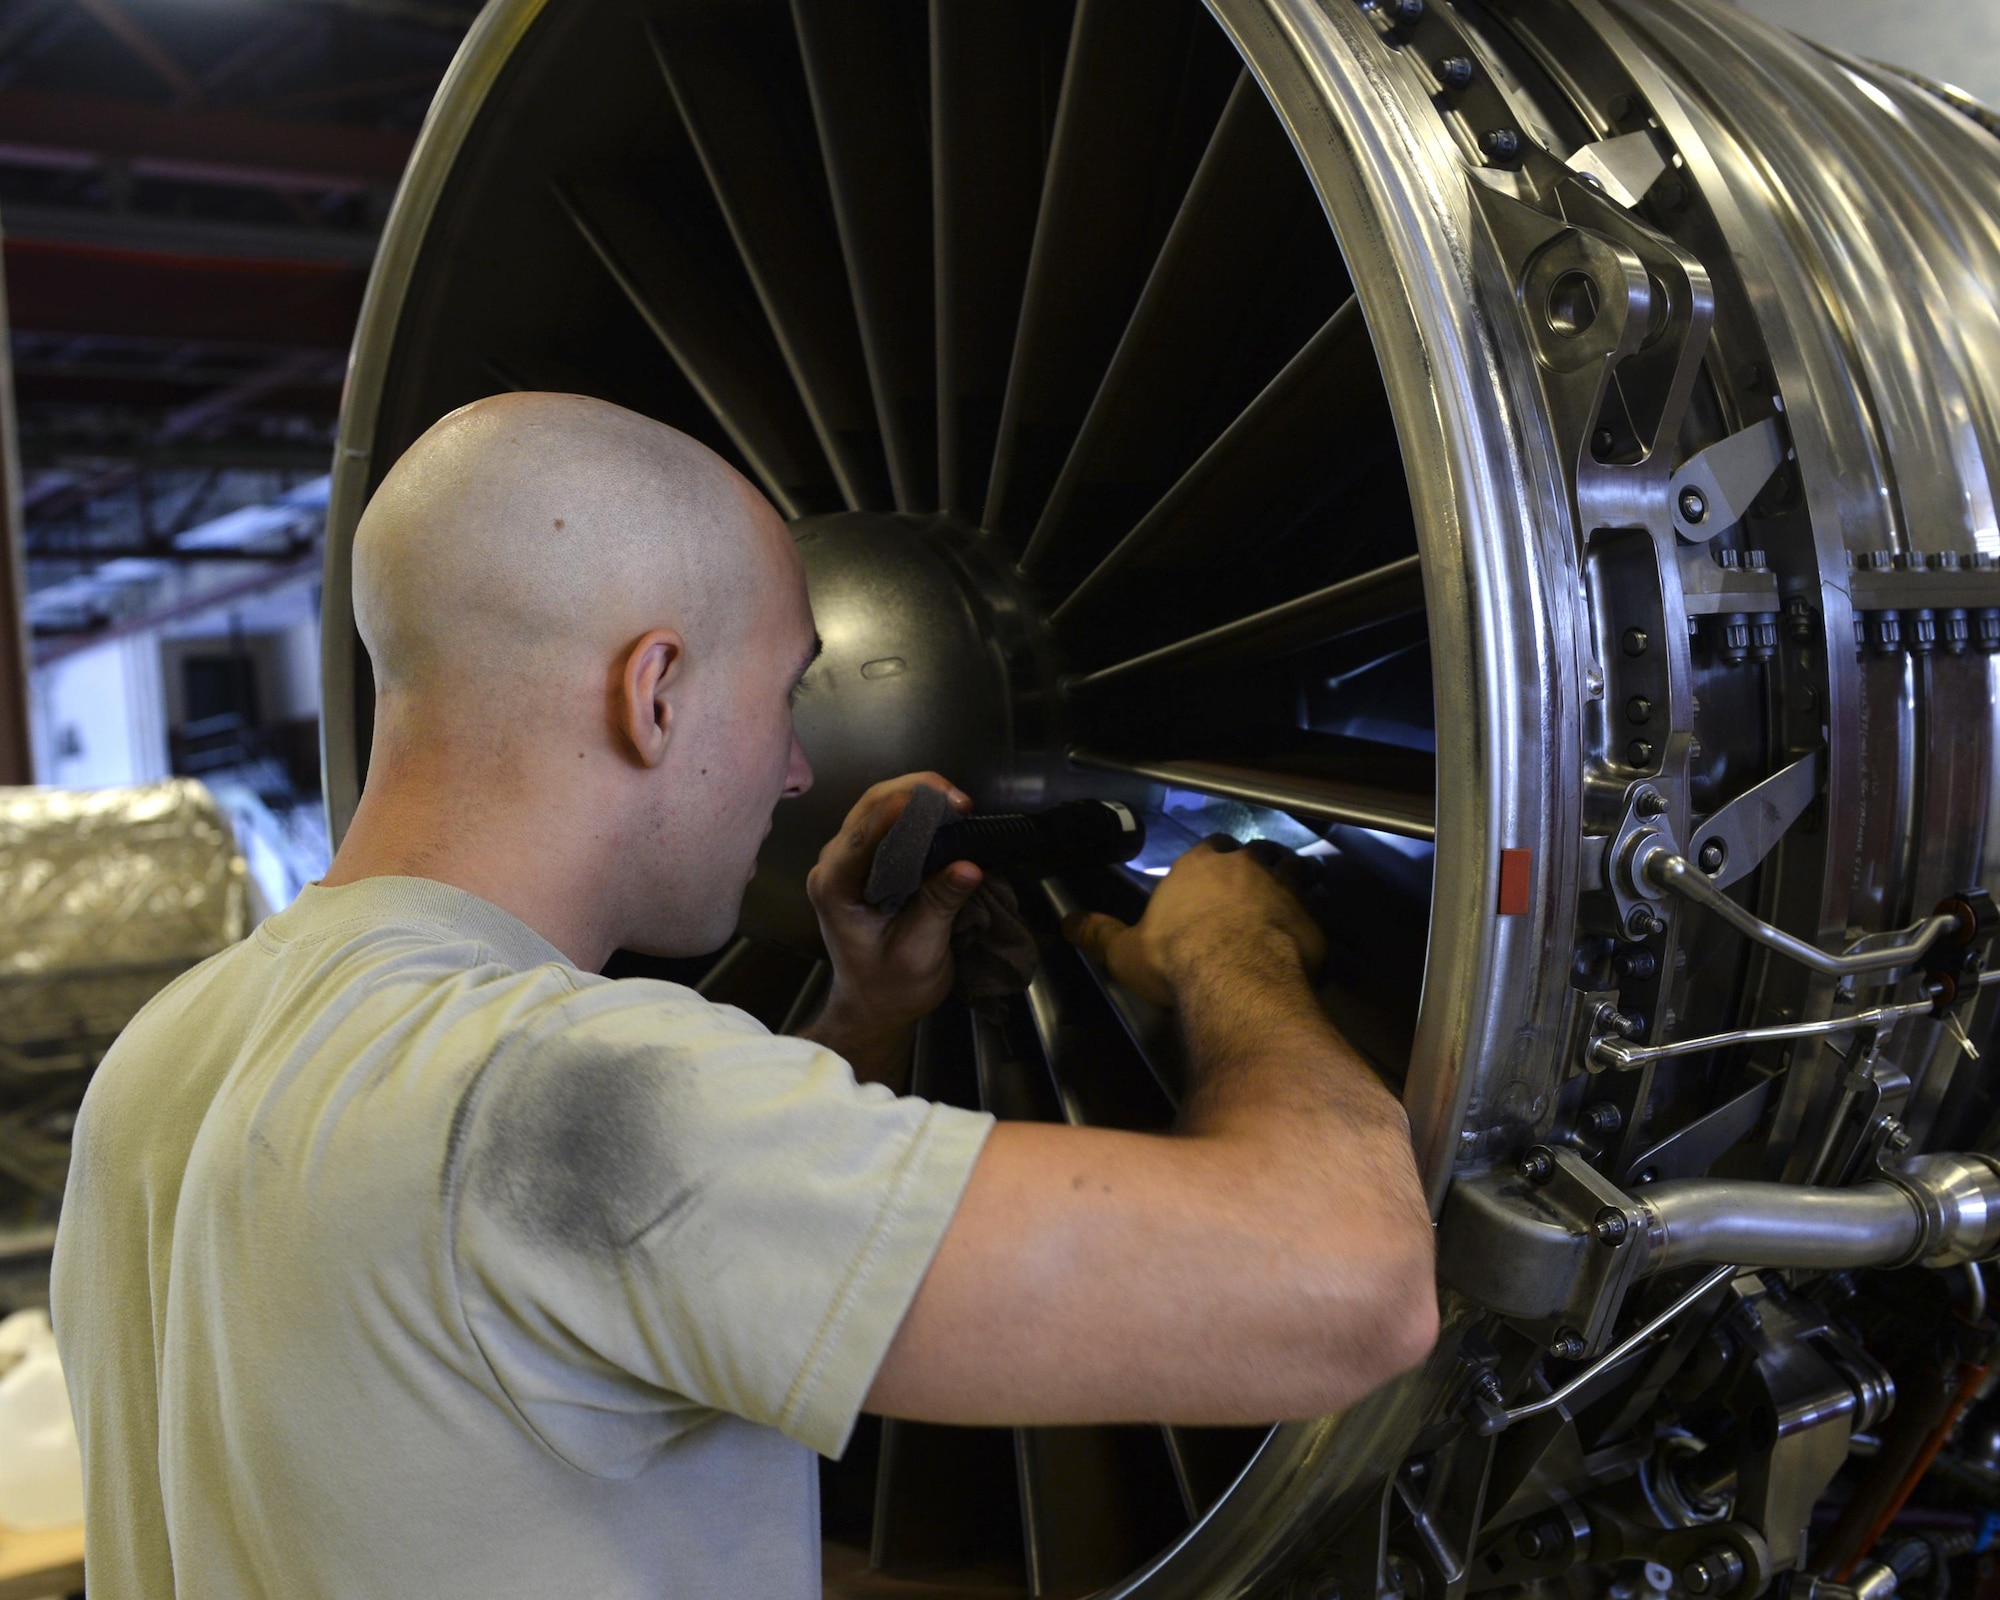 U.S. Air Force Airman 1st Class Tyler Covington, 325th Maintenance Squadron aerospace propulsion technician, performs maintenance on the blades of an F-119 engine in the Propulsion Flight hangar at Tyndall Air Force Base, Fla., Aug. 29, 2016. The Airmen of Tyndall’s Propulsion Flight inspect and maintain the engines used in the F-22 Raptor to ensure the jets are always mission-ready. (U.S. Air Force photo by Airman 1st Class Cody R. Miller/Released)